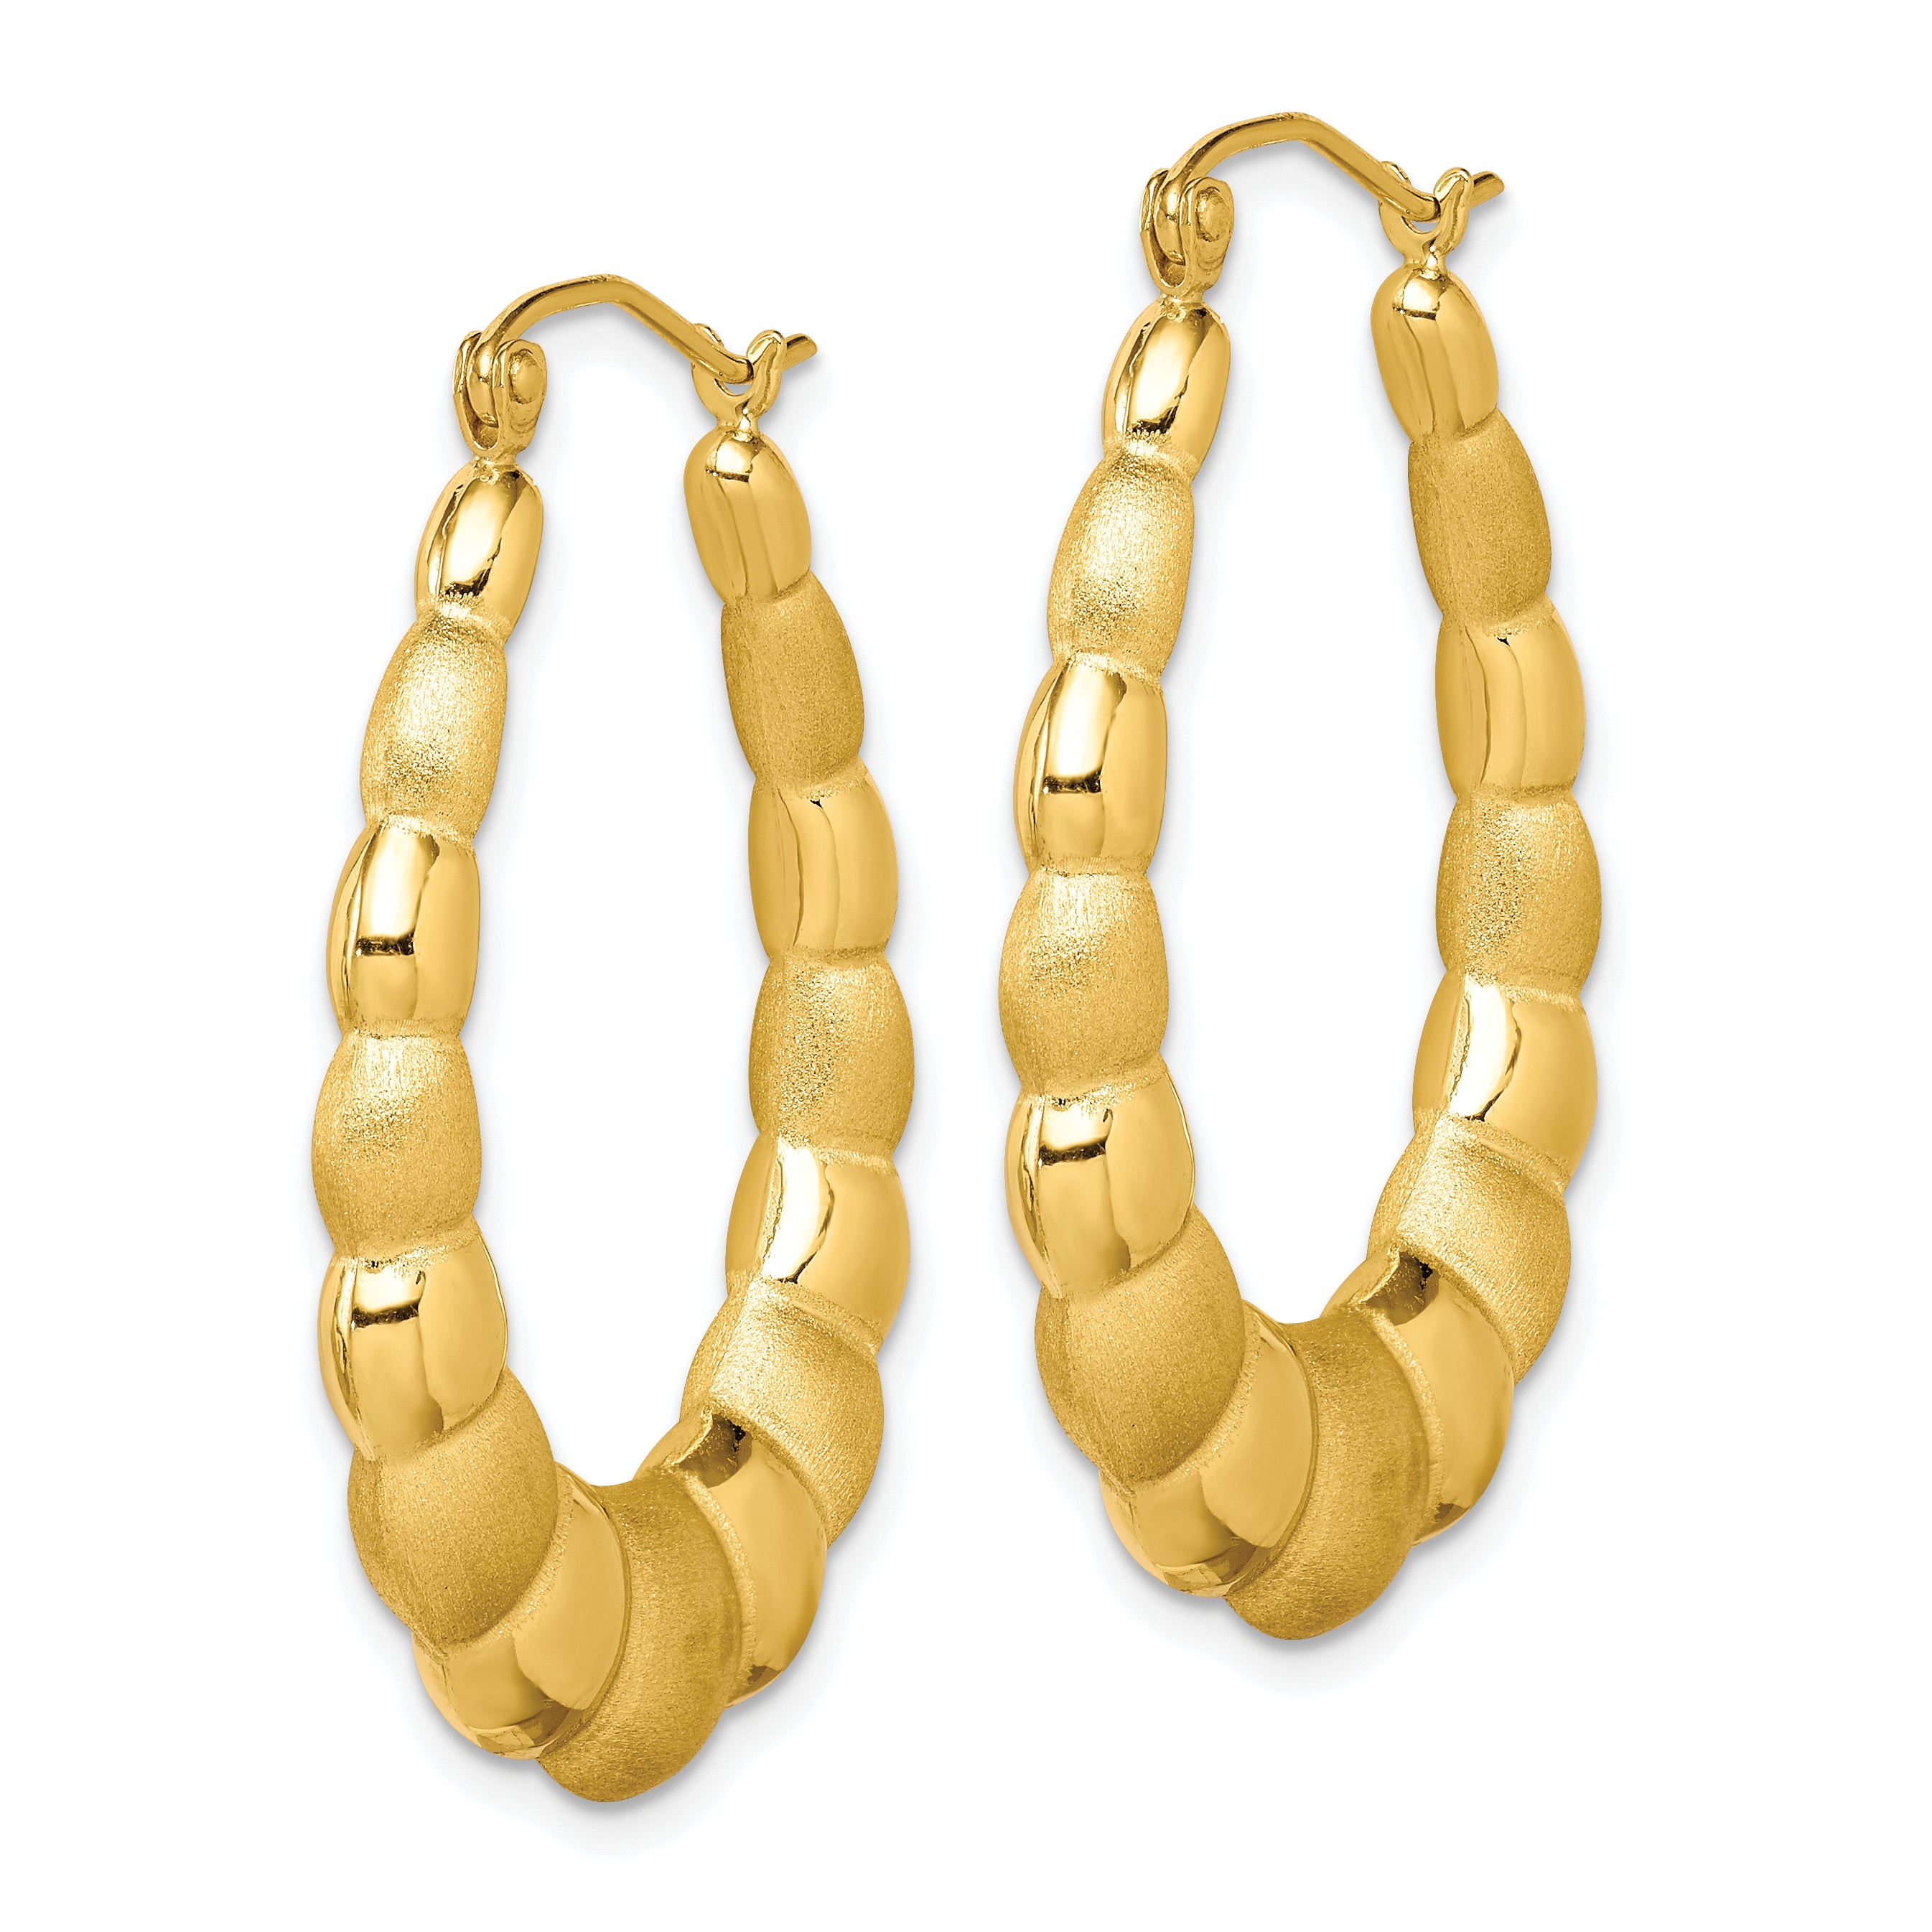 10k Satin and Polished Hollow Fancy Earrings